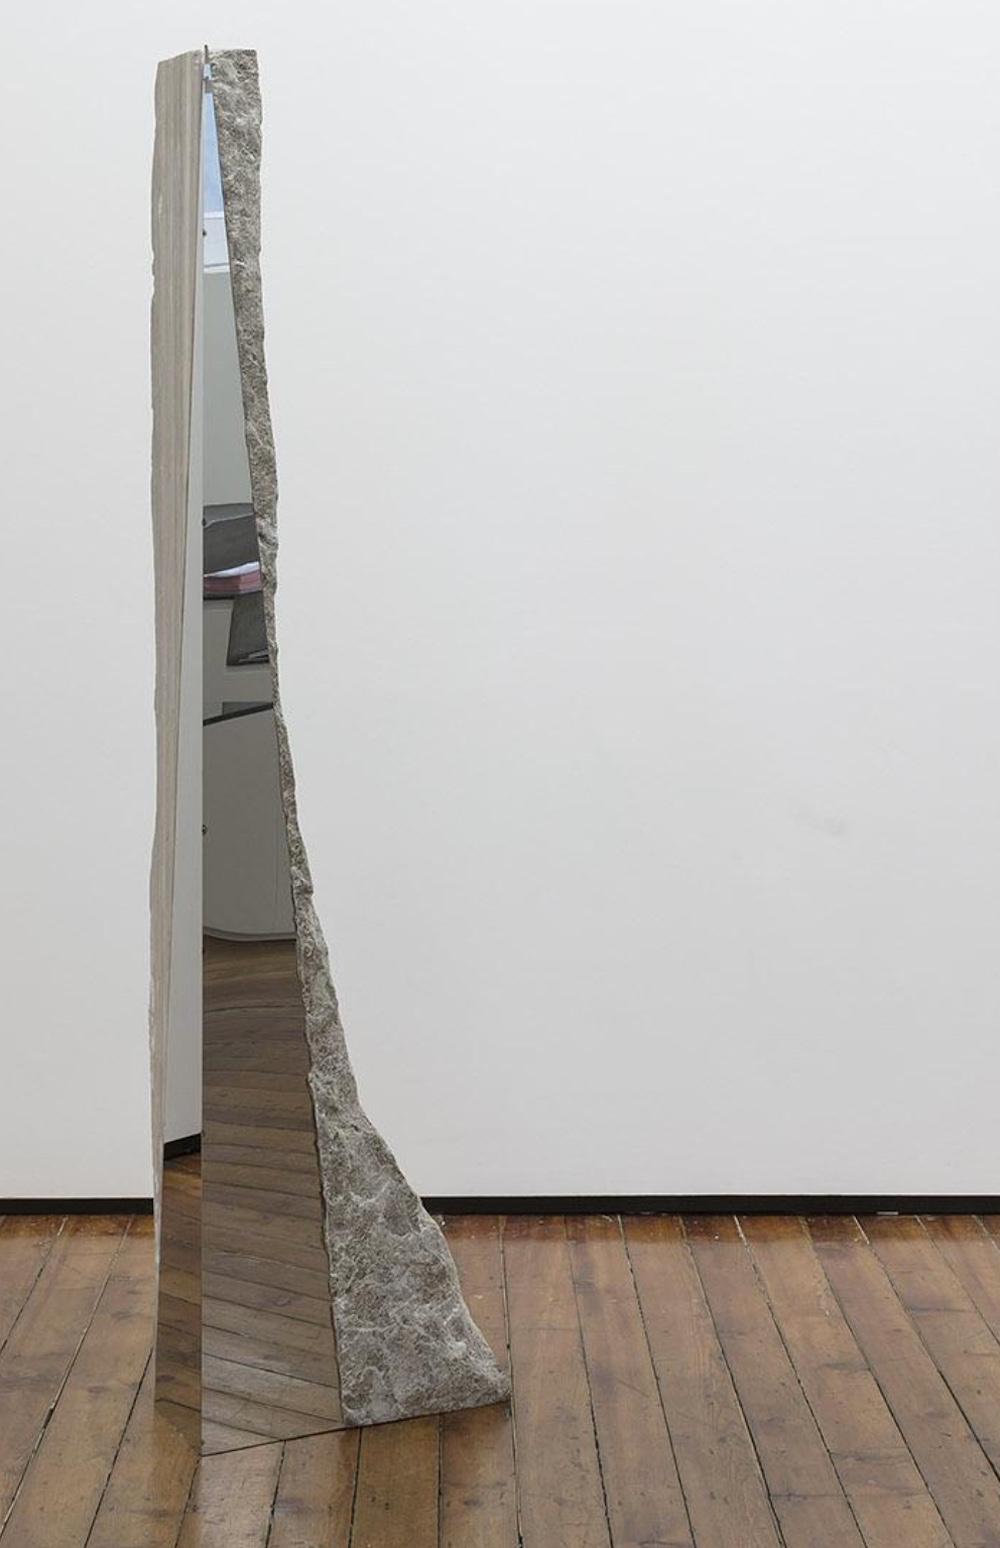 Untitled IV is a unique sculpture by contemporary artist Mattia Bosco. This sculpture is made of Palissandro marble and stainless steel, dimensions are 173 × 43 × 22 cm (68.1 × 16.9 × 8.7 in). 
This sculpture is a unique piece and comes with a